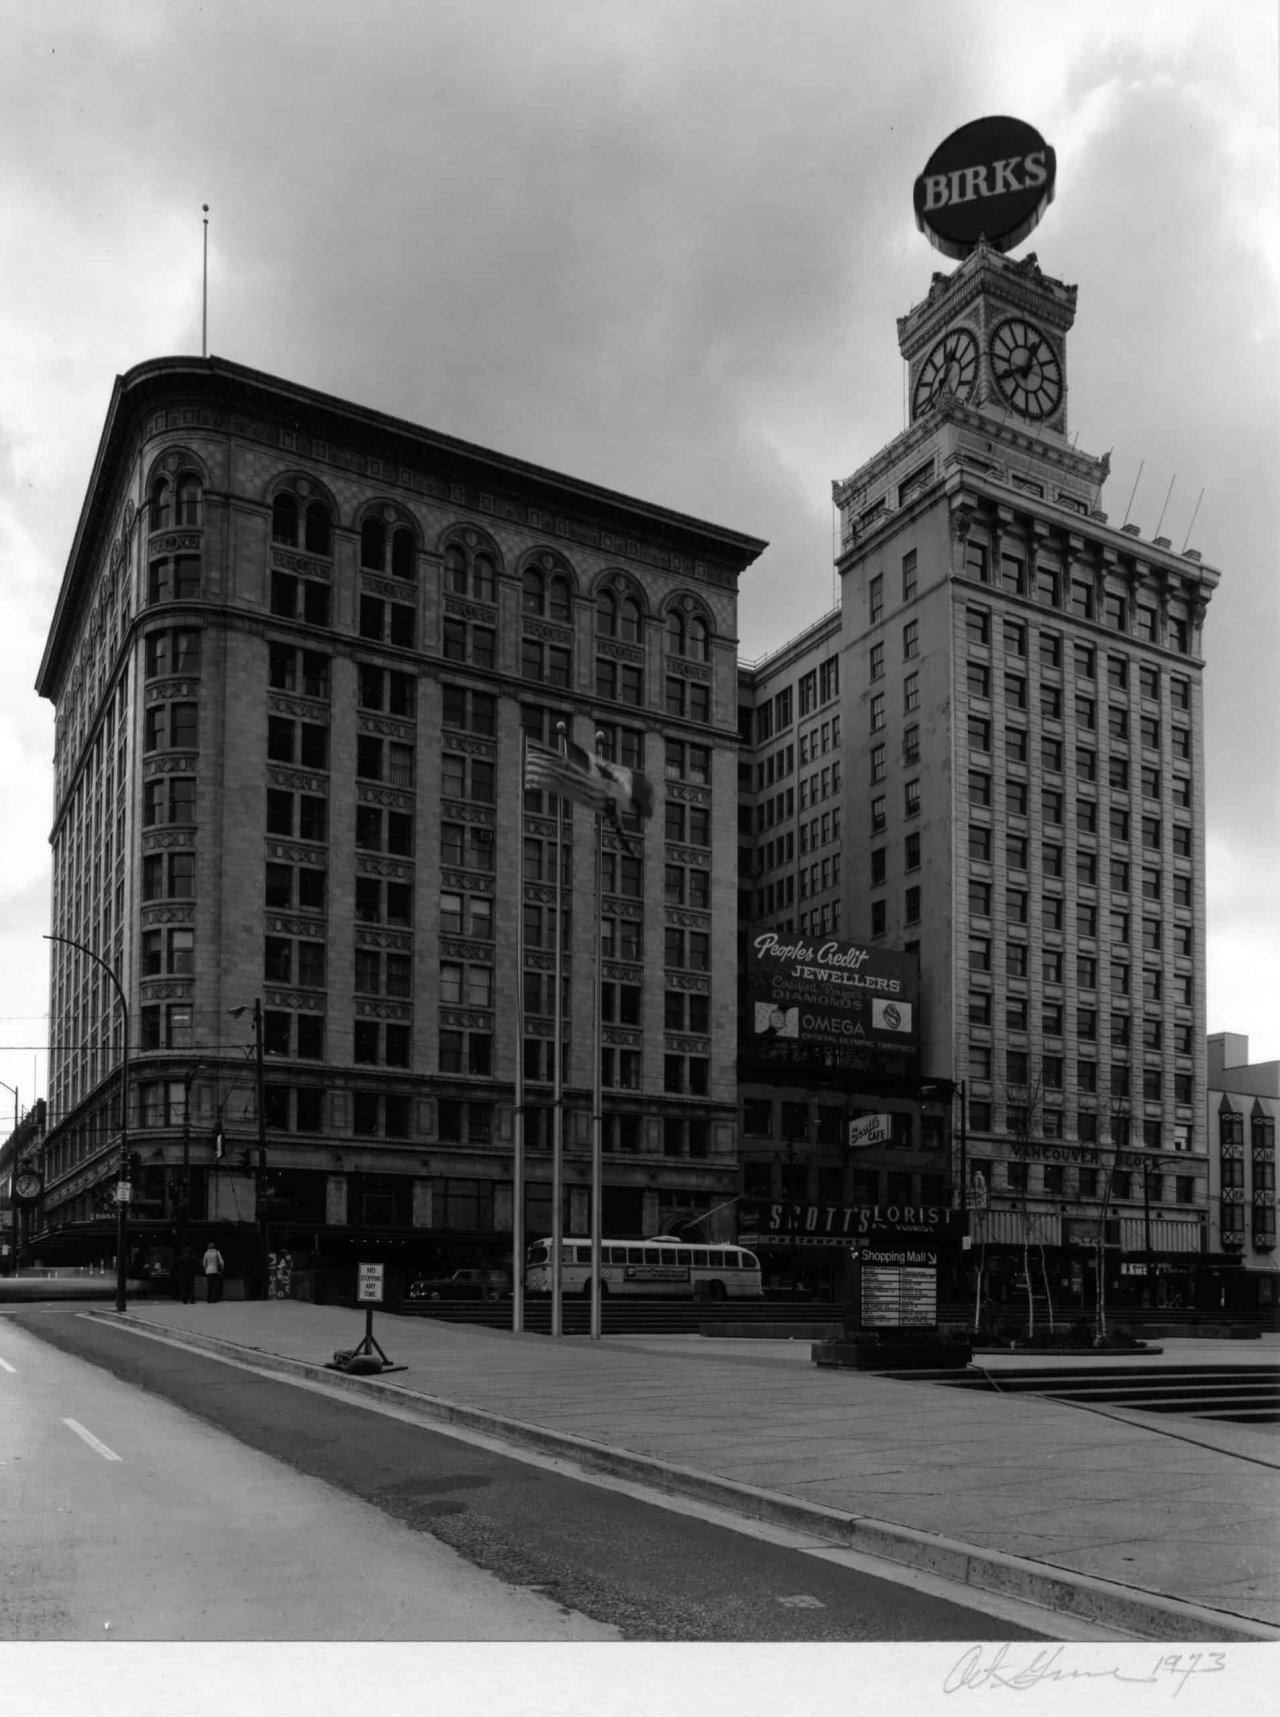 Birks Building and Vancouver Block in 1973. Photograph by Art Grice. City of Vancouver Archives, CVA 70-11.